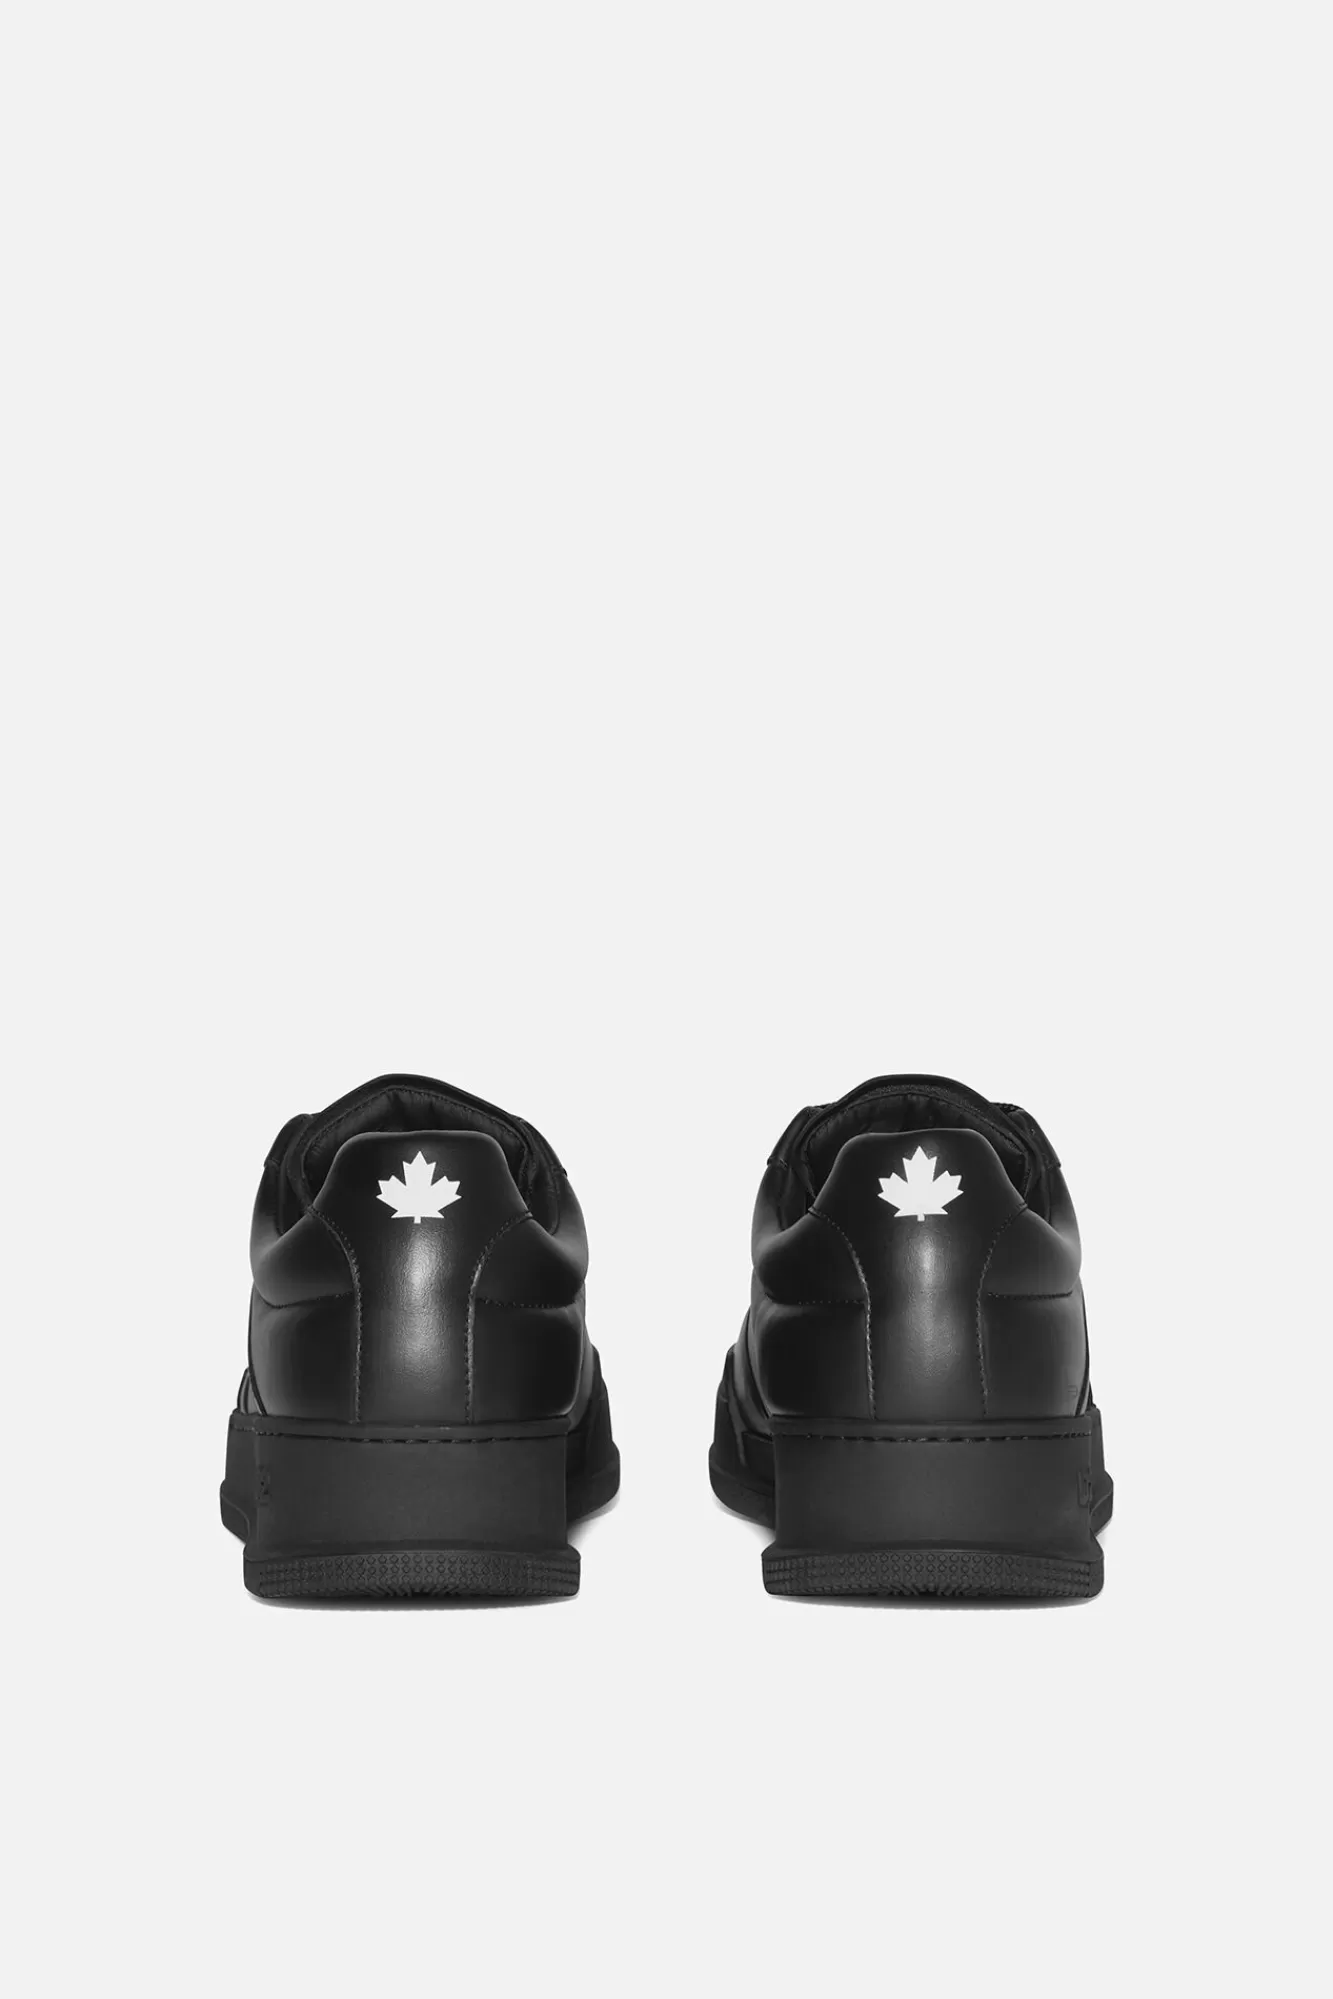 Canadian Sneakers<Dsquared2 Hot